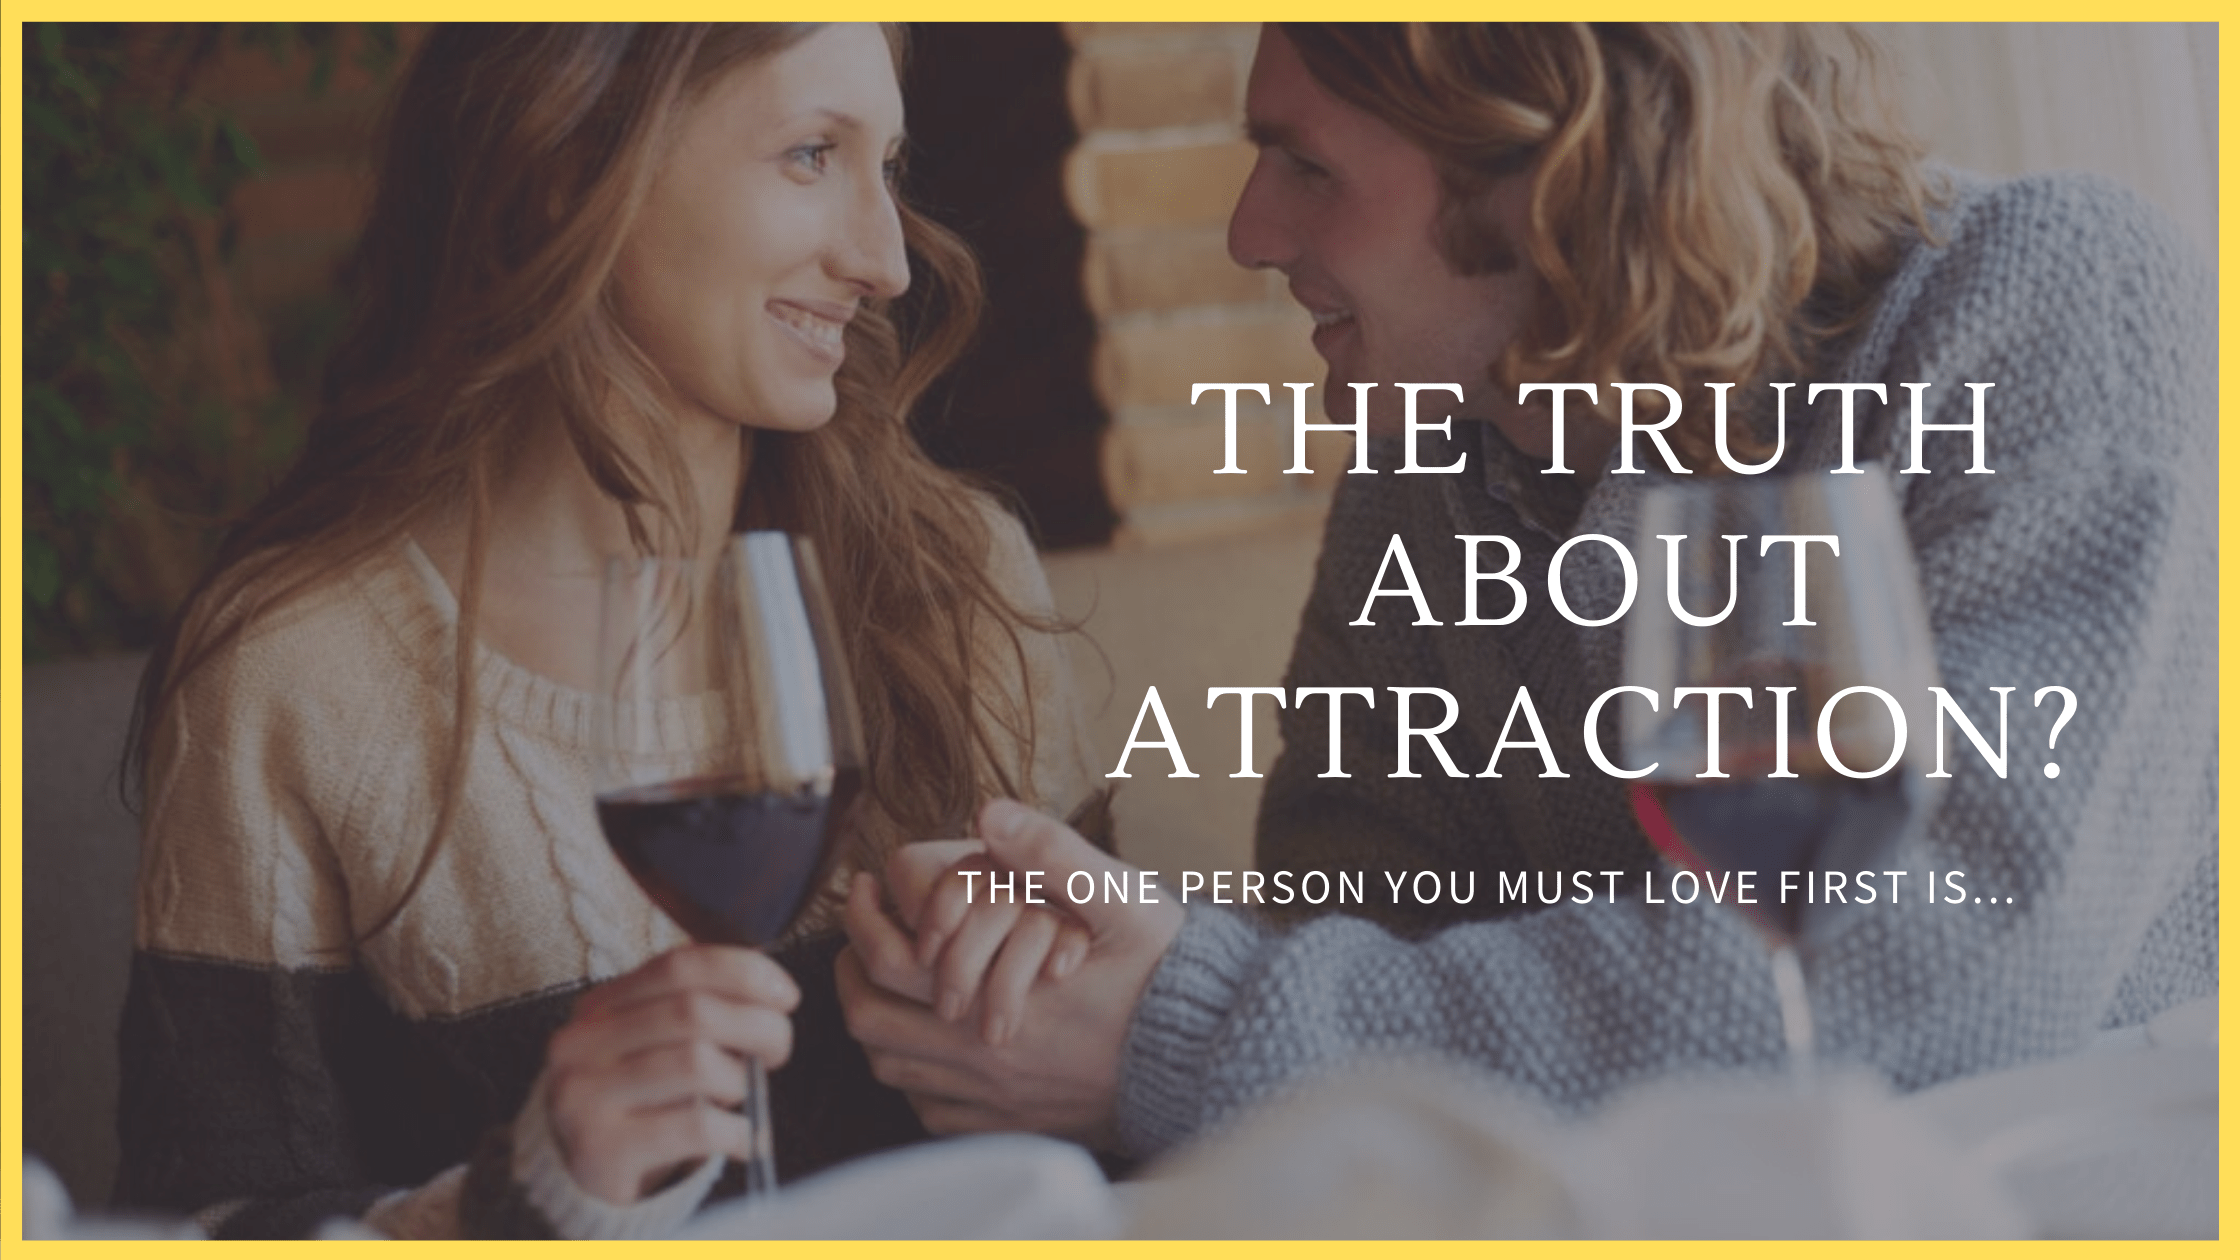 the truth about attraction, truth about attraction, how to attract someone, truth about attraction